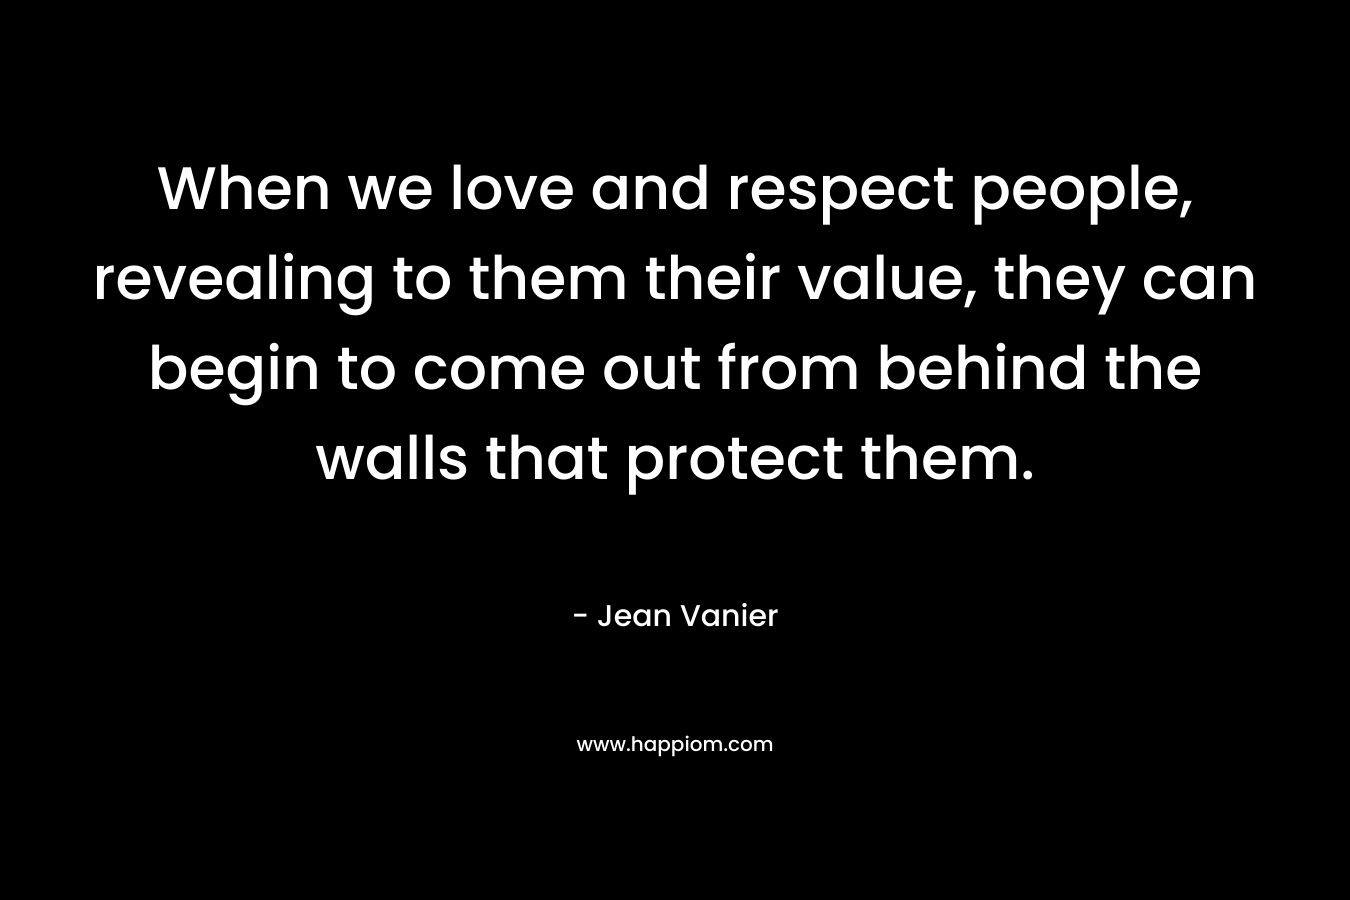 When we love and respect people, revealing to them their value, they can begin to come out from behind the walls that protect them. – Jean Vanier